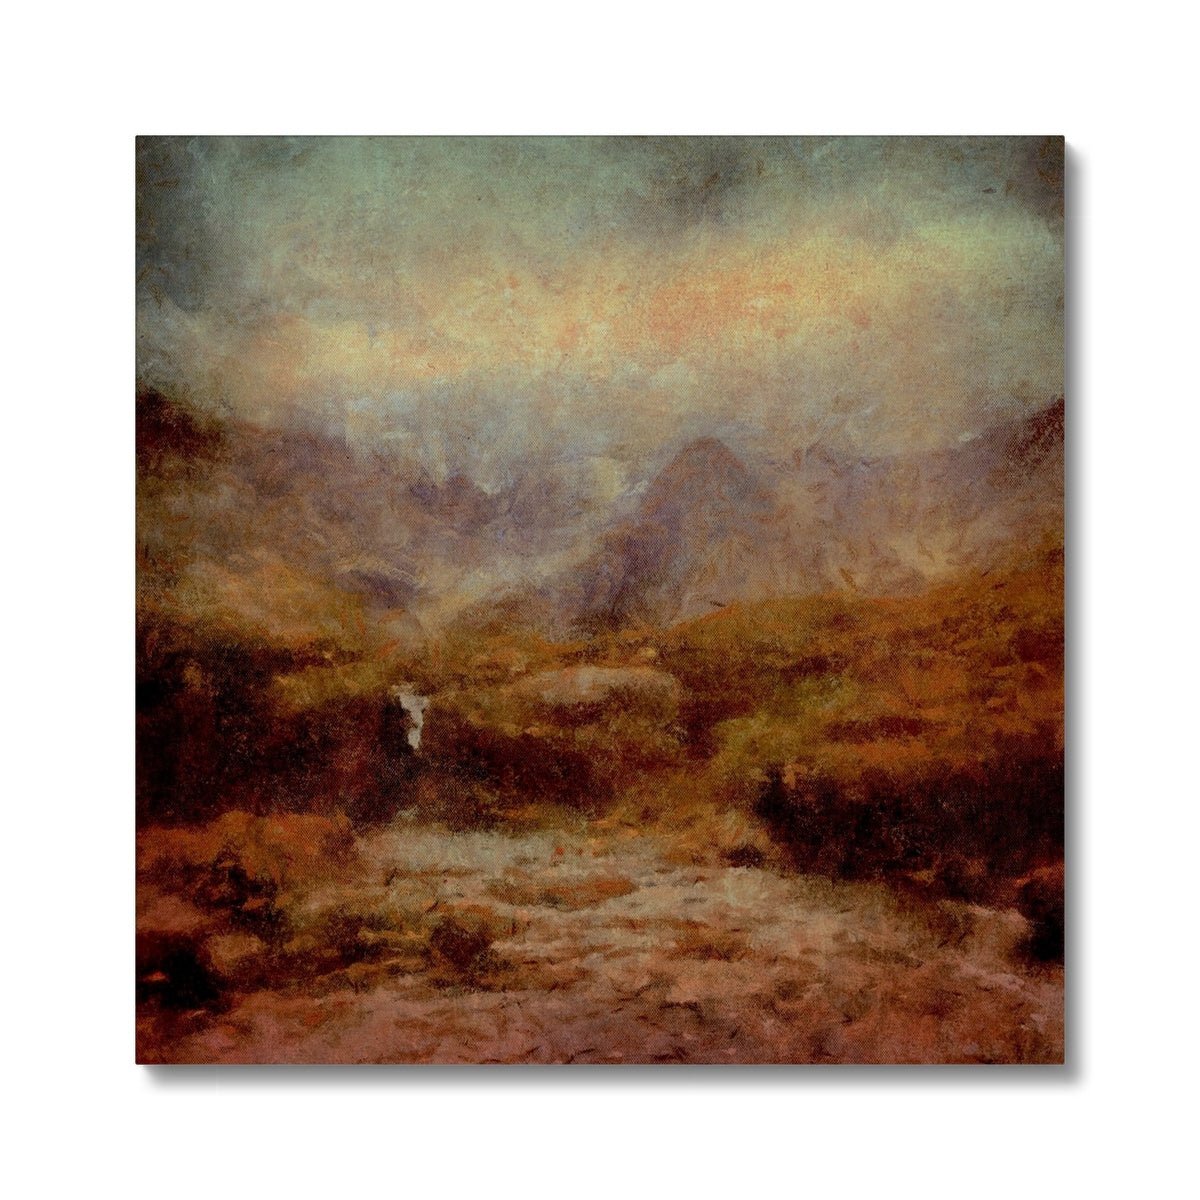 The Brooding Fairy Pools Skye Painting | Canvas From Scotland-Contemporary Stretched Canvas Prints-Skye Art Gallery-24"x24"-Paintings, Prints, Homeware, Art Gifts From Scotland By Scottish Artist Kevin Hunter